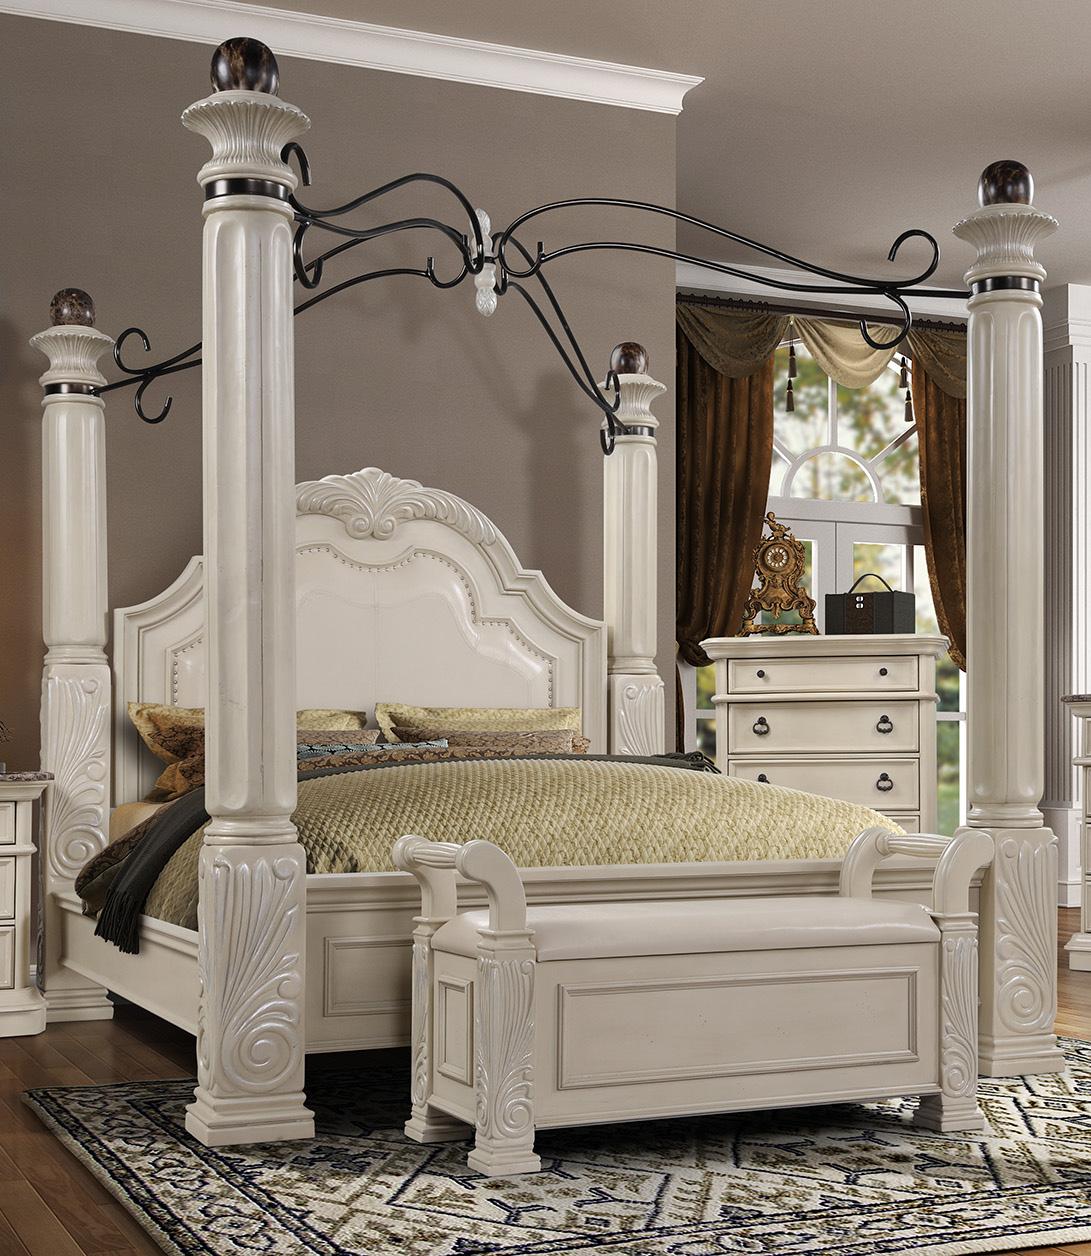 Classic, Traditional Poster Bed B6006 B6006-EK in Antique White Faux Leather